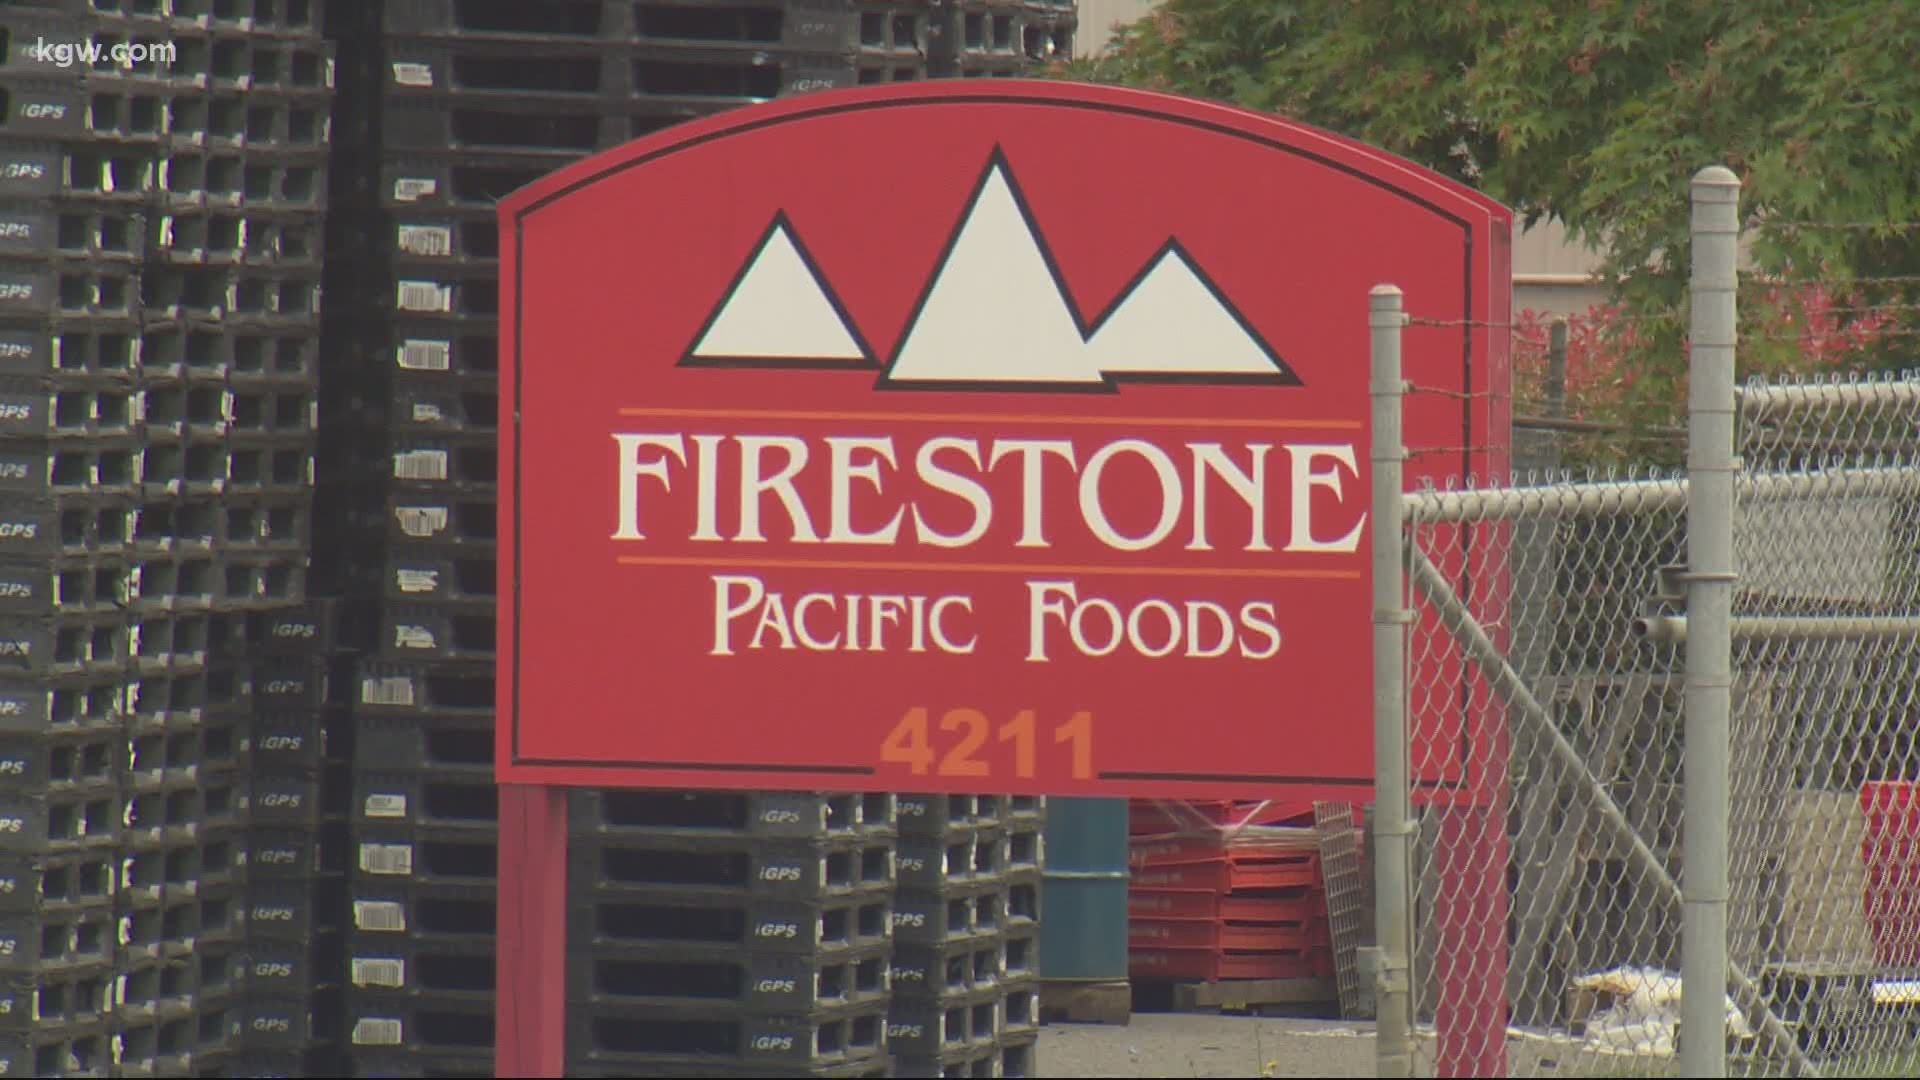 Firestone Pacific Foods in Vancouver has been closed since May 18, the day after its first employee tested positive for COVID-19.